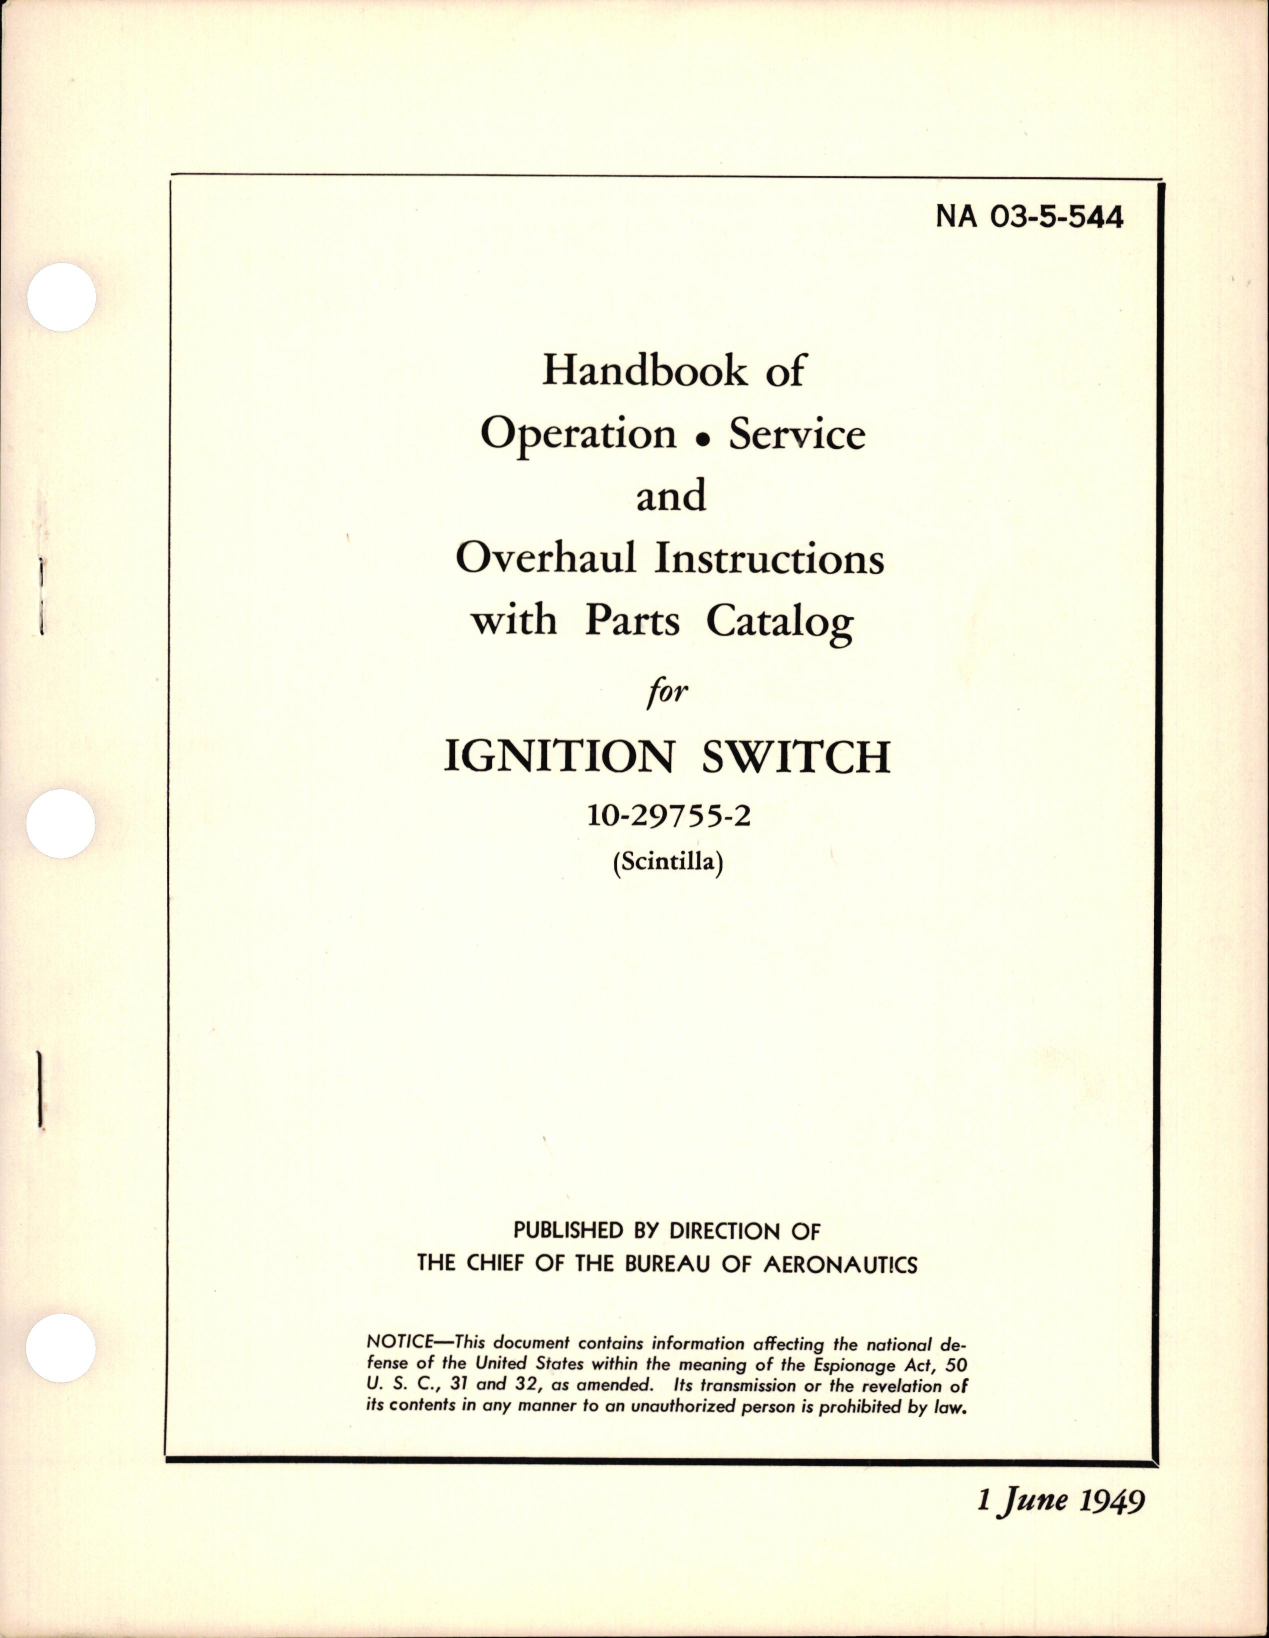 Sample page 1 from AirCorps Library document: Operation, Service and Overhaul Instructions with Parts Catalog for Ignition Switch - 10-29755-2